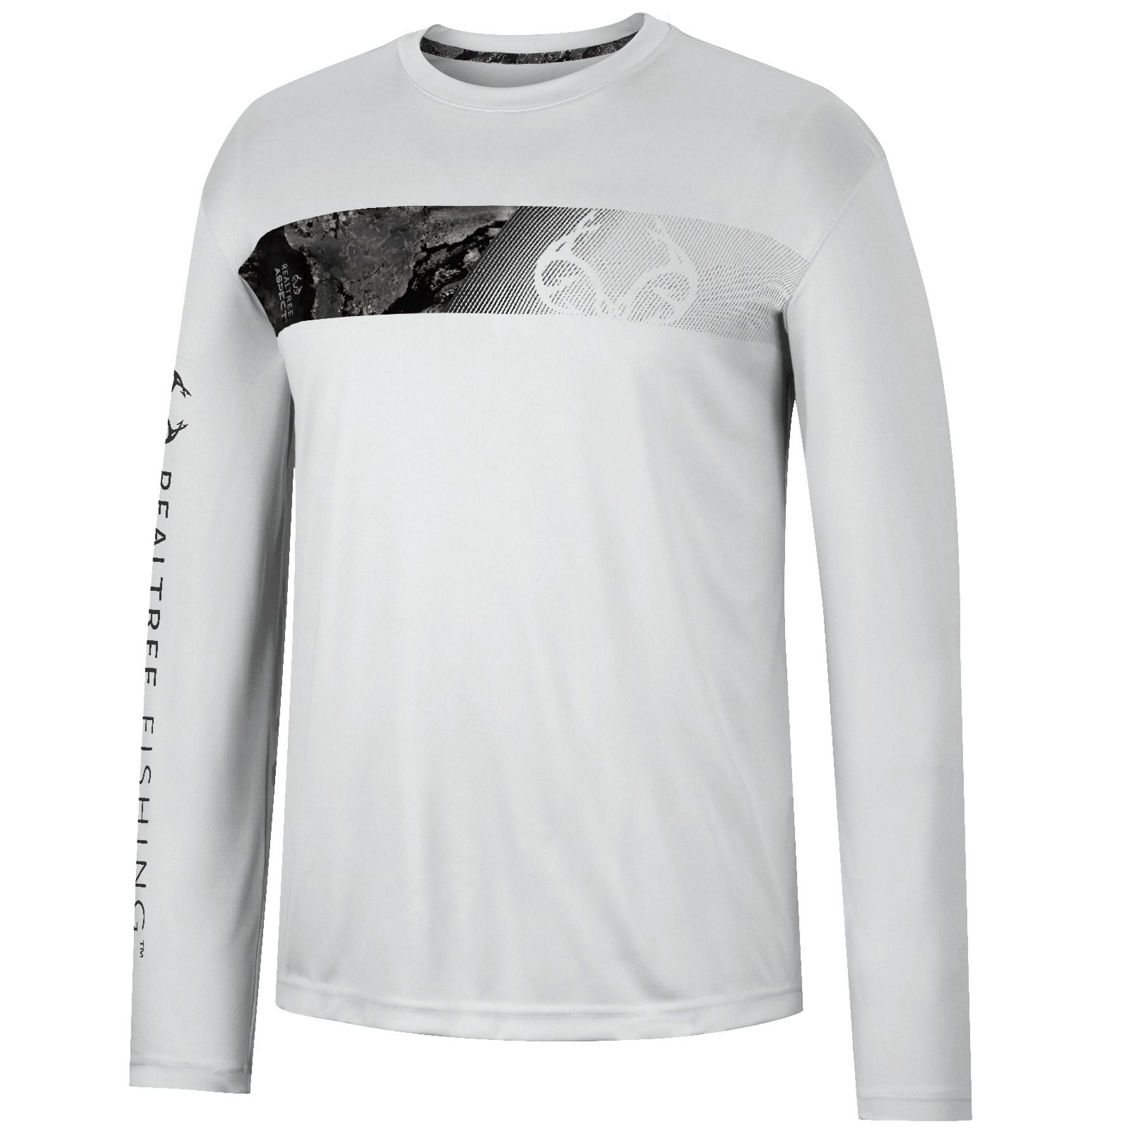 Realtree Cape Performance Fishing Tee, Shirts, Clothing & Accessories